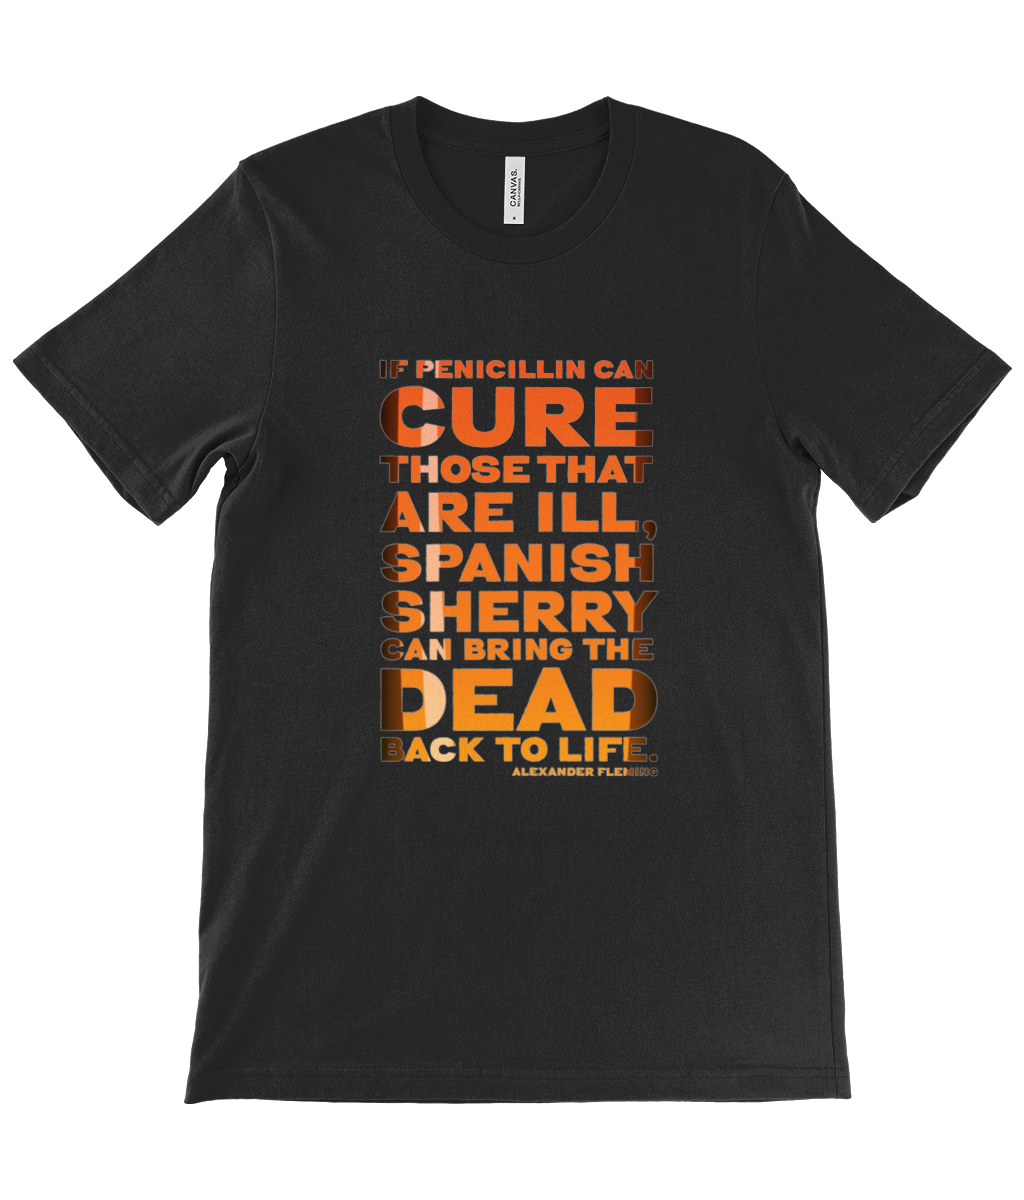 Canvas Unisex Crew Neck T-Shirt - “If penicillin can cure those that are ill, Spanish sherry can bring the dead back to life.” — Alexander Fleming